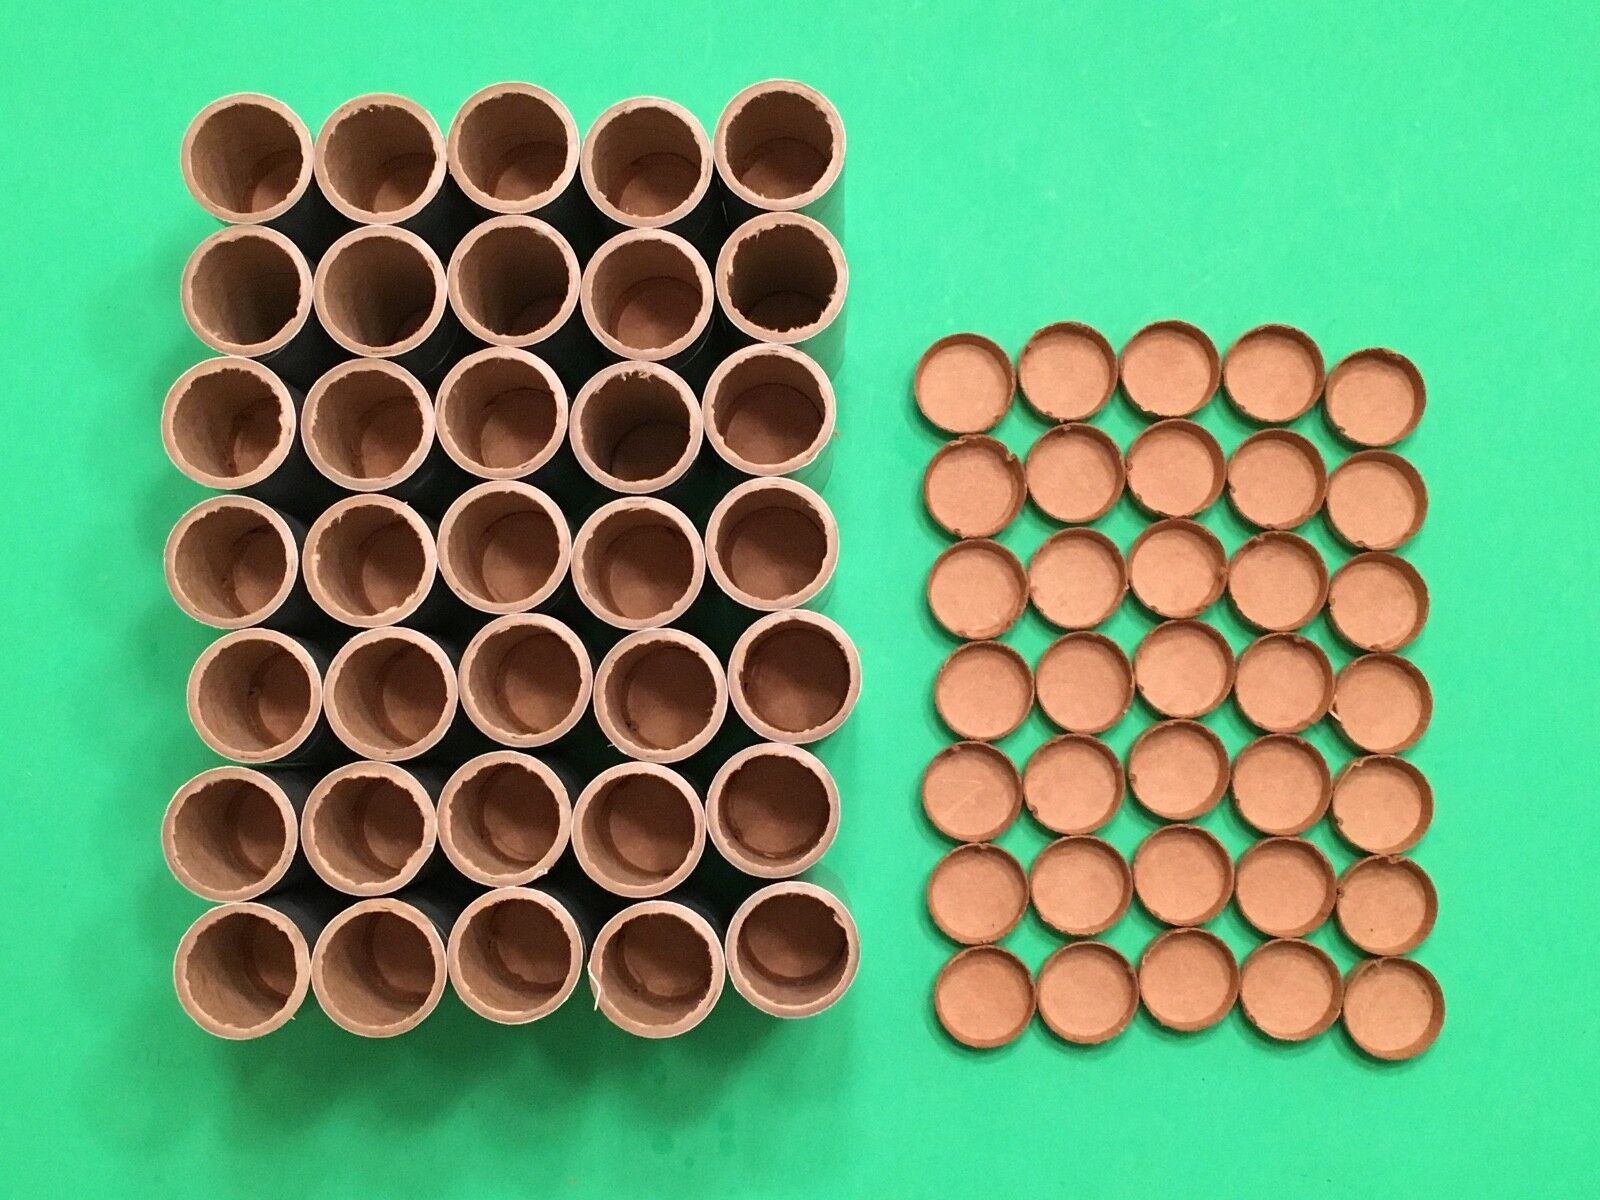 35 NEW Spiral 3 1/2"x1"x1/8" Fireworks Silver PYRO Cardboard Tubes W/End Plugs ! Unbranded Does Not Apply - фотография #6